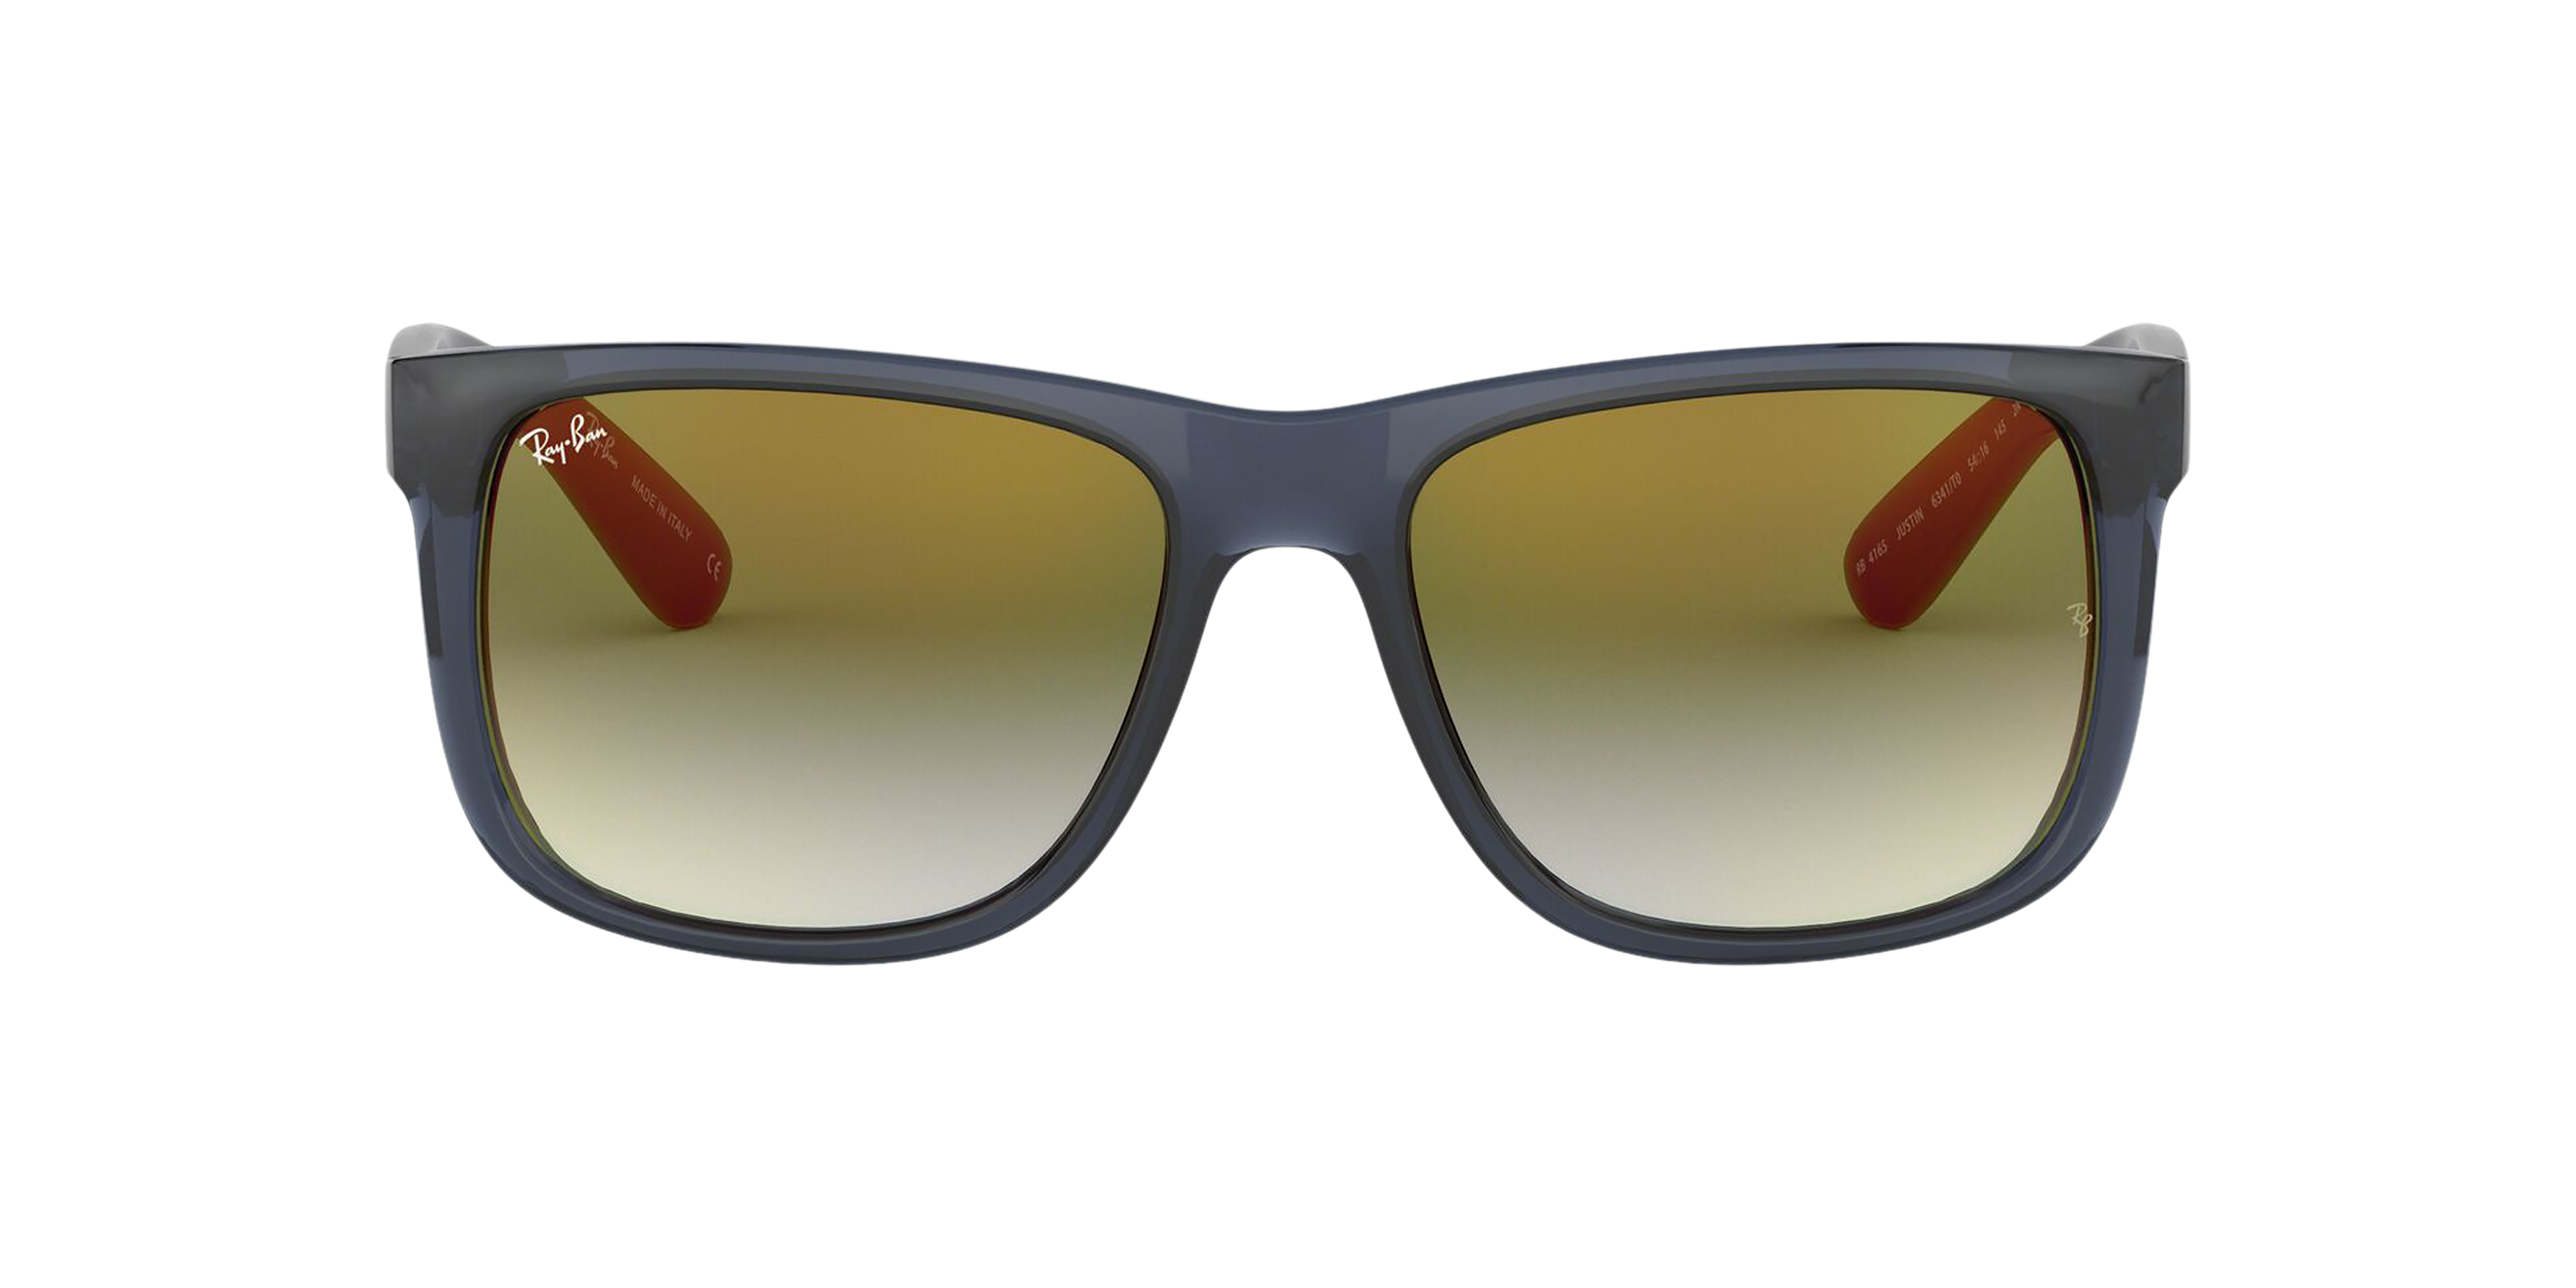 [products.image.front] Ray-Ban Justin Flash Gradient RB4165 6341T0